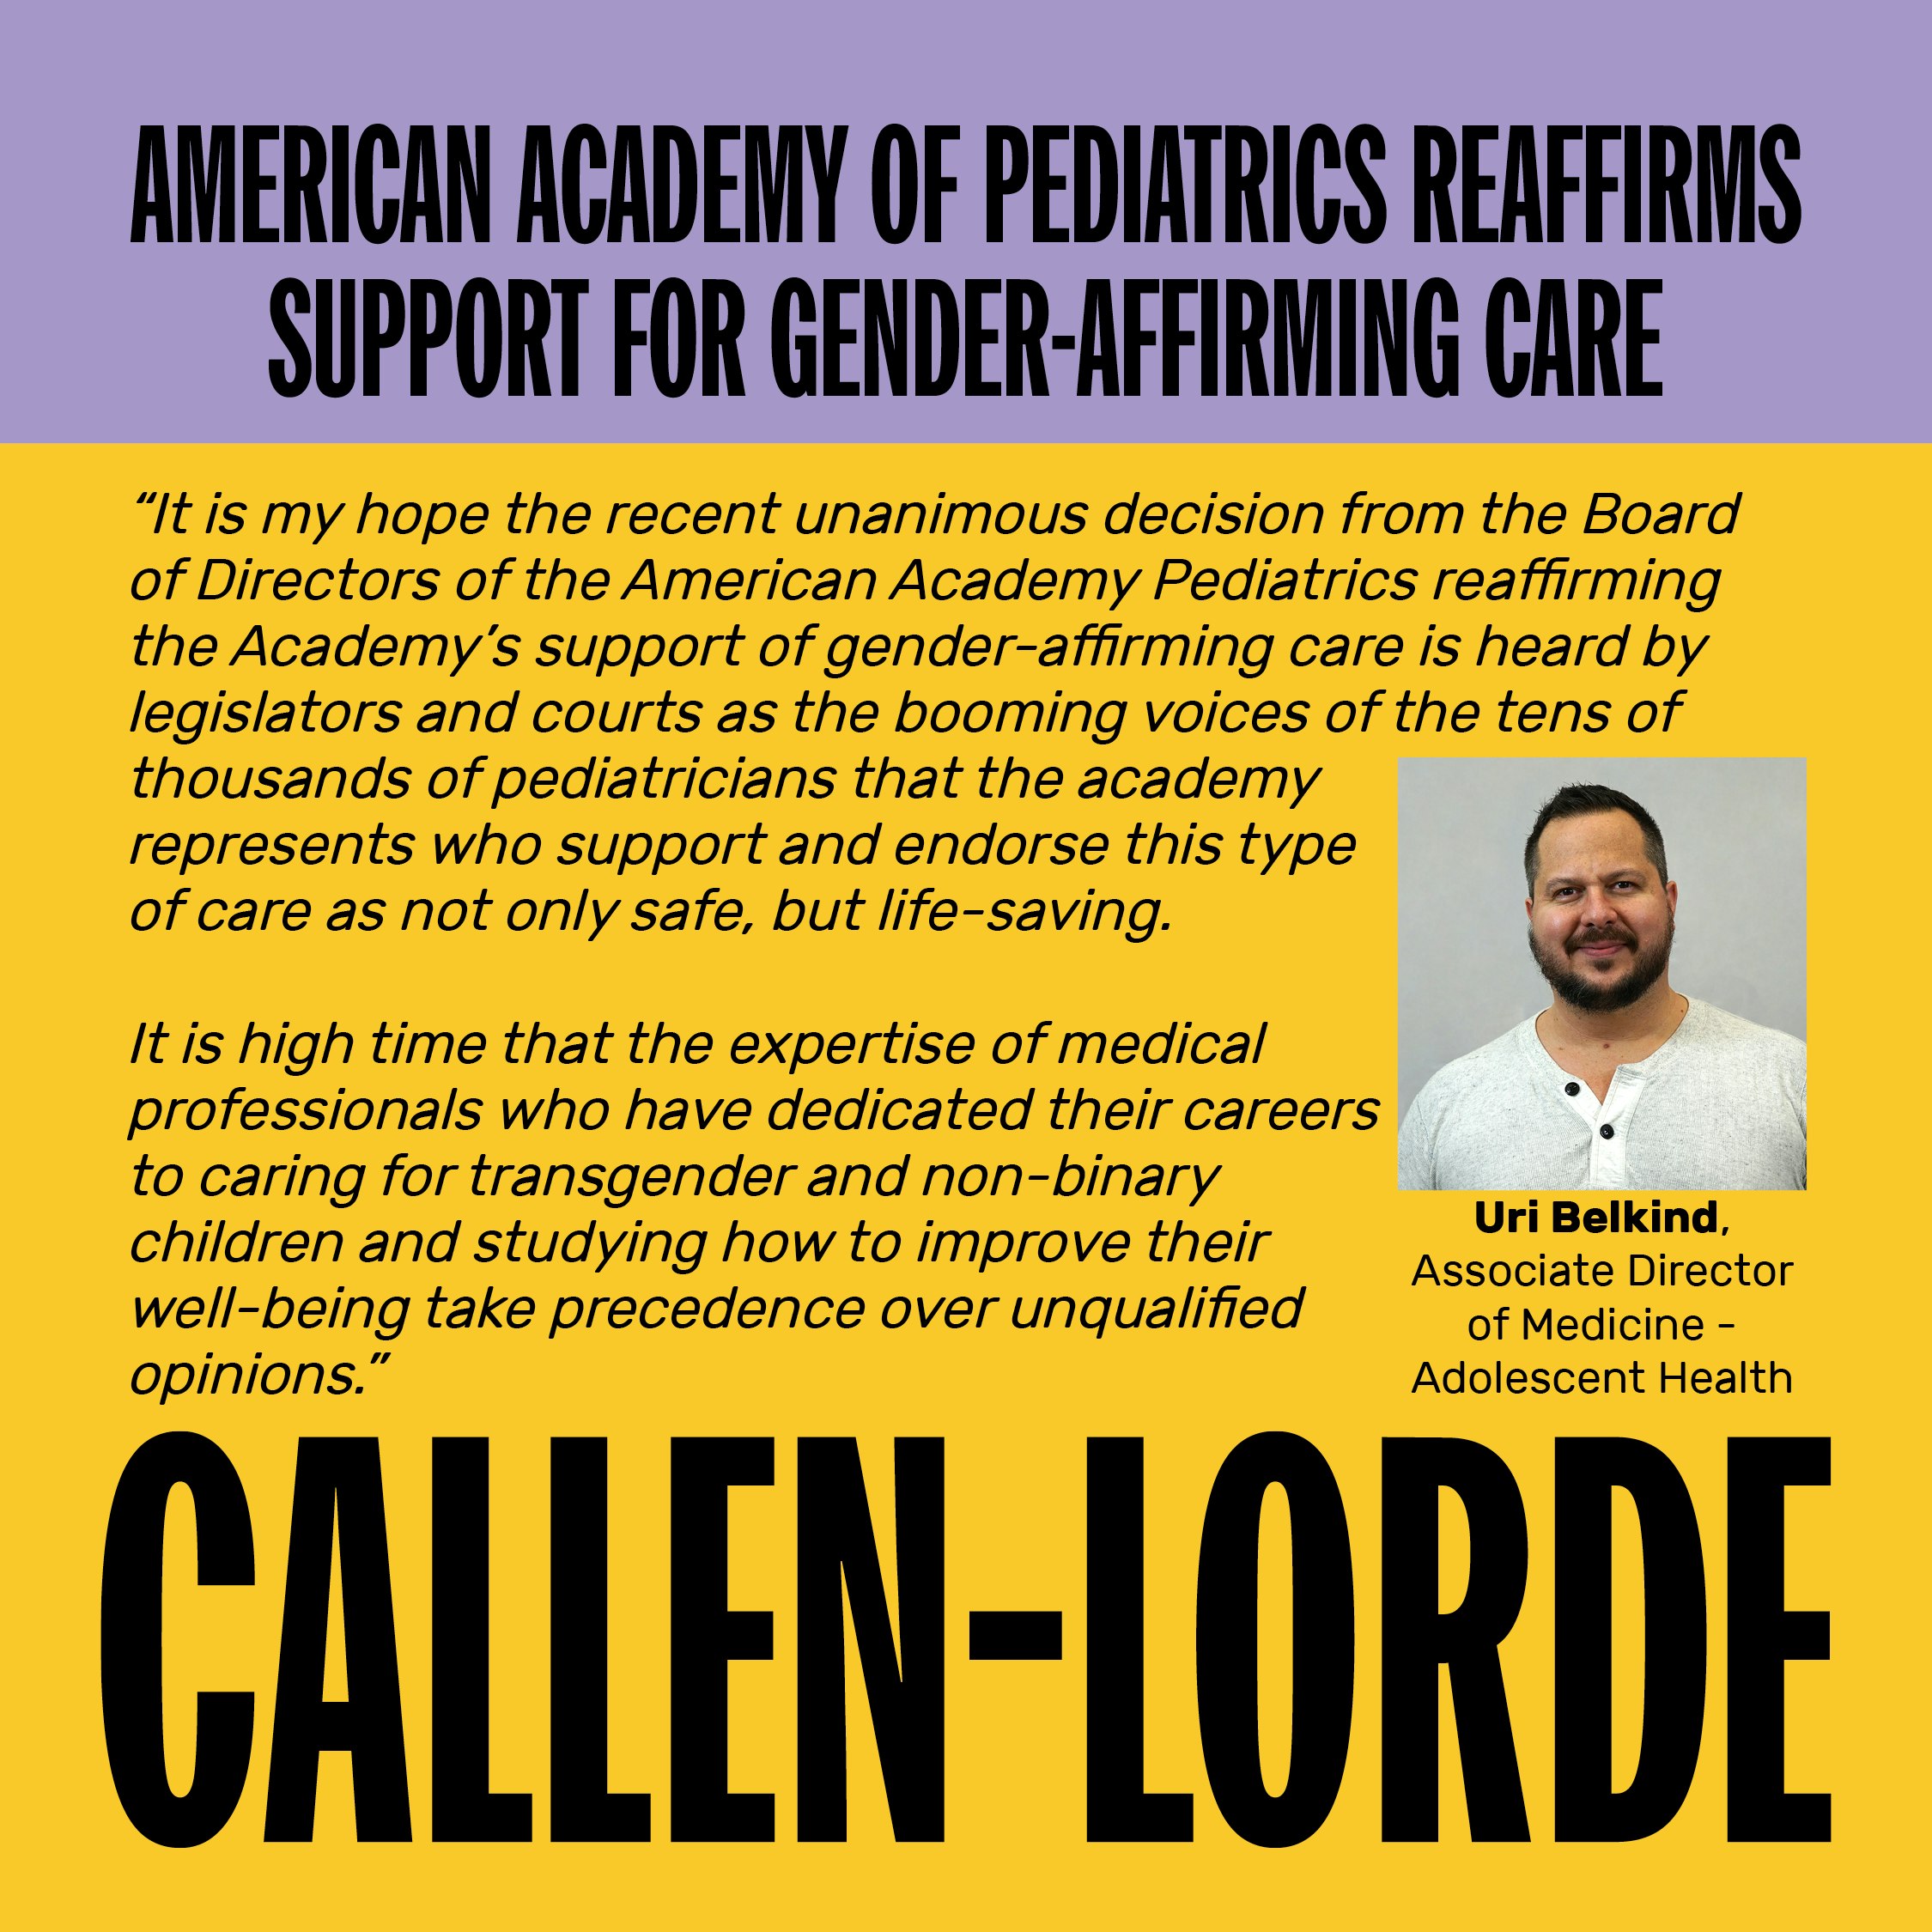 American Academy of Pediatrics Reaffirms Support for Gender-Affirming Care